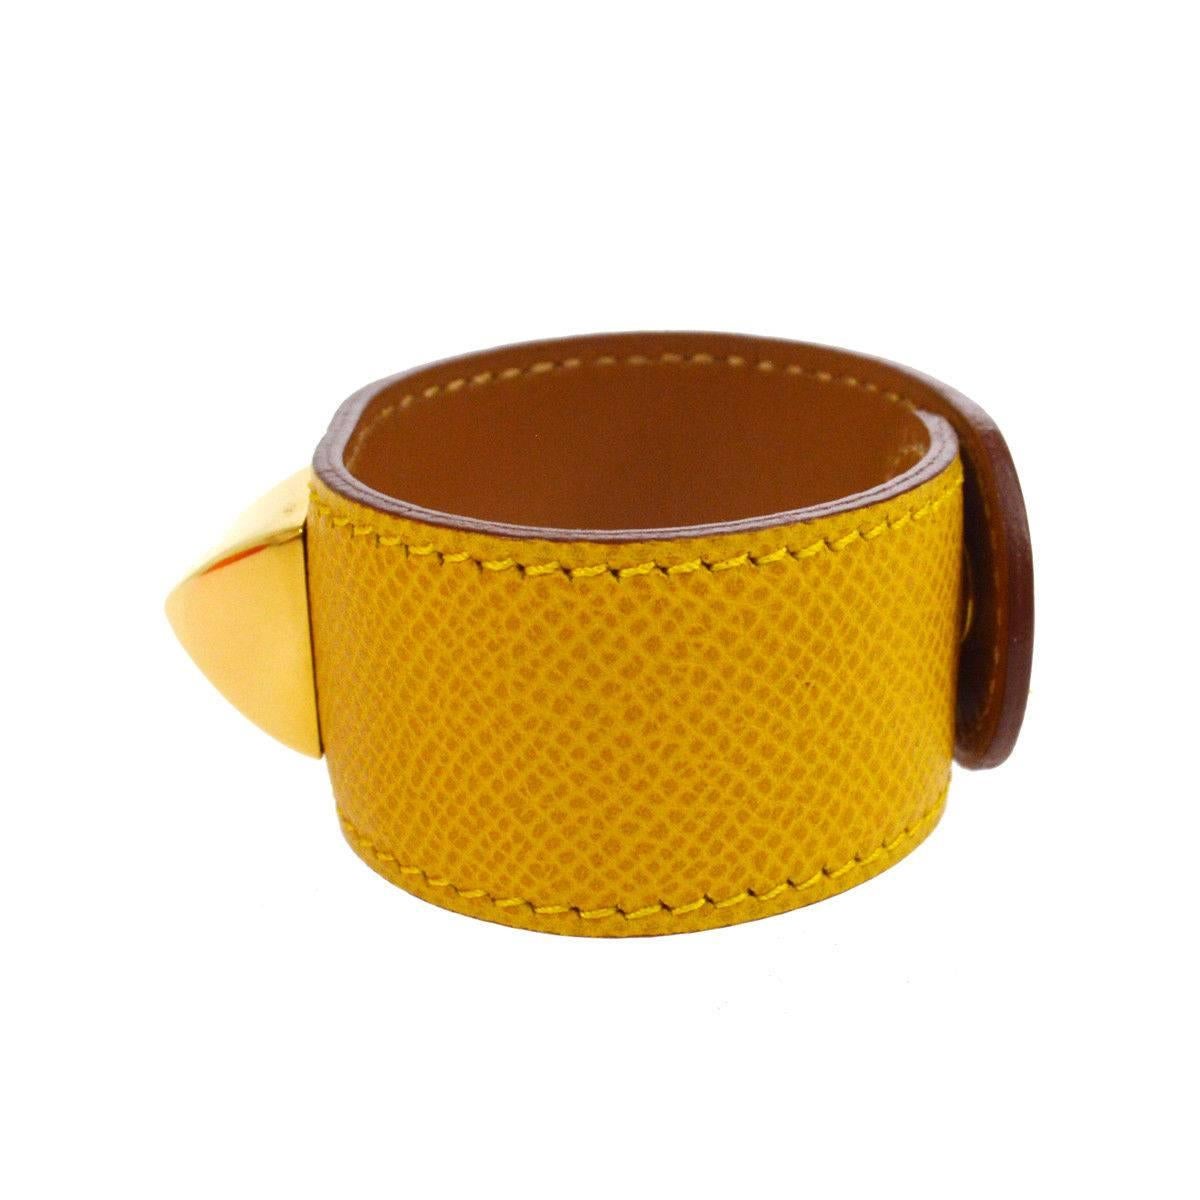 Hermes Mustard Leather Gold Stud Men's Women's Evening Cuff Bracelet in Box

Leather
Metal
Gold tone hardware
Snap closure
Made in France
Width 1